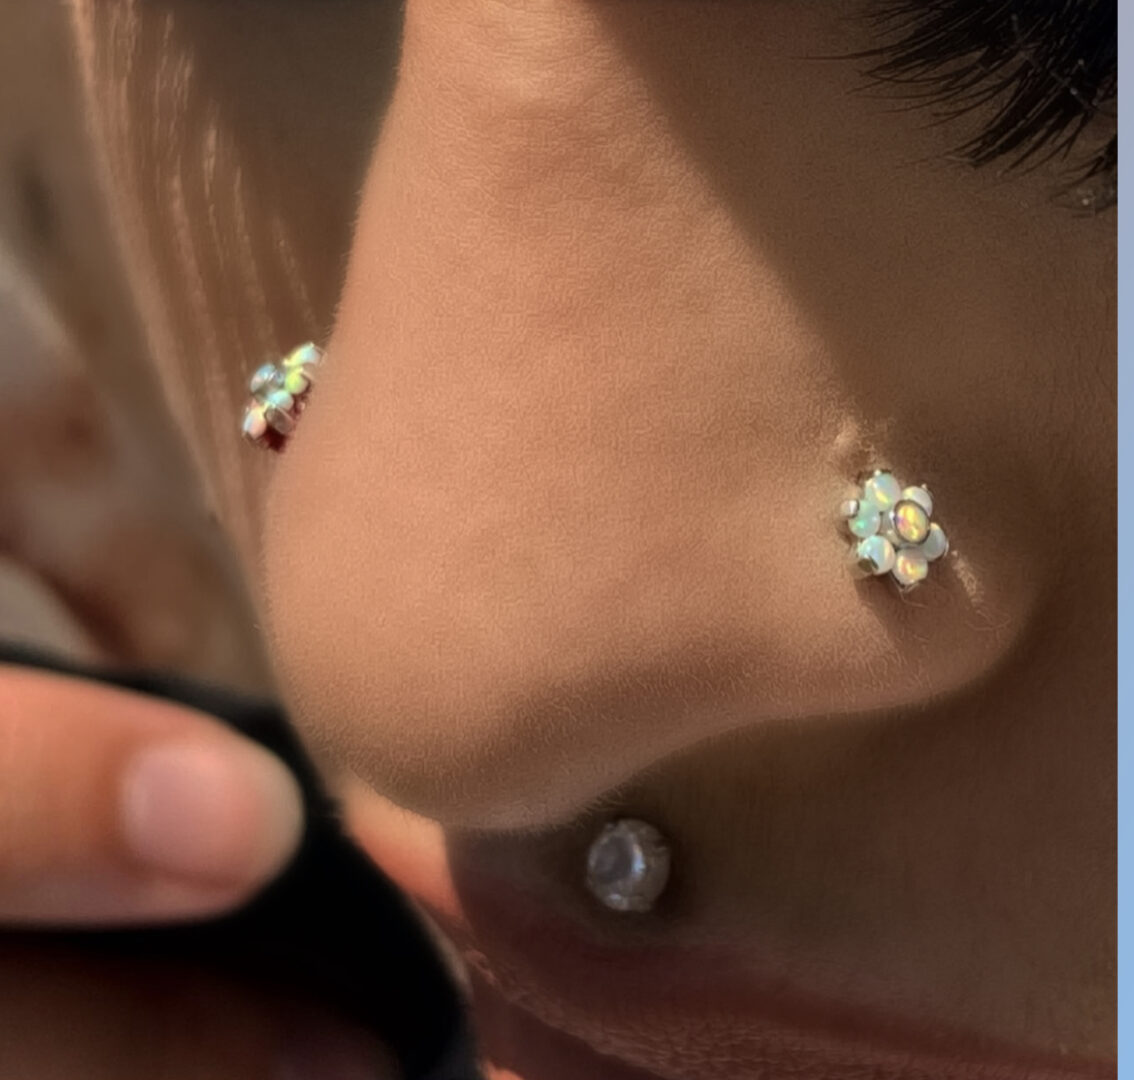 A person with their nose piercing and ear lobe.